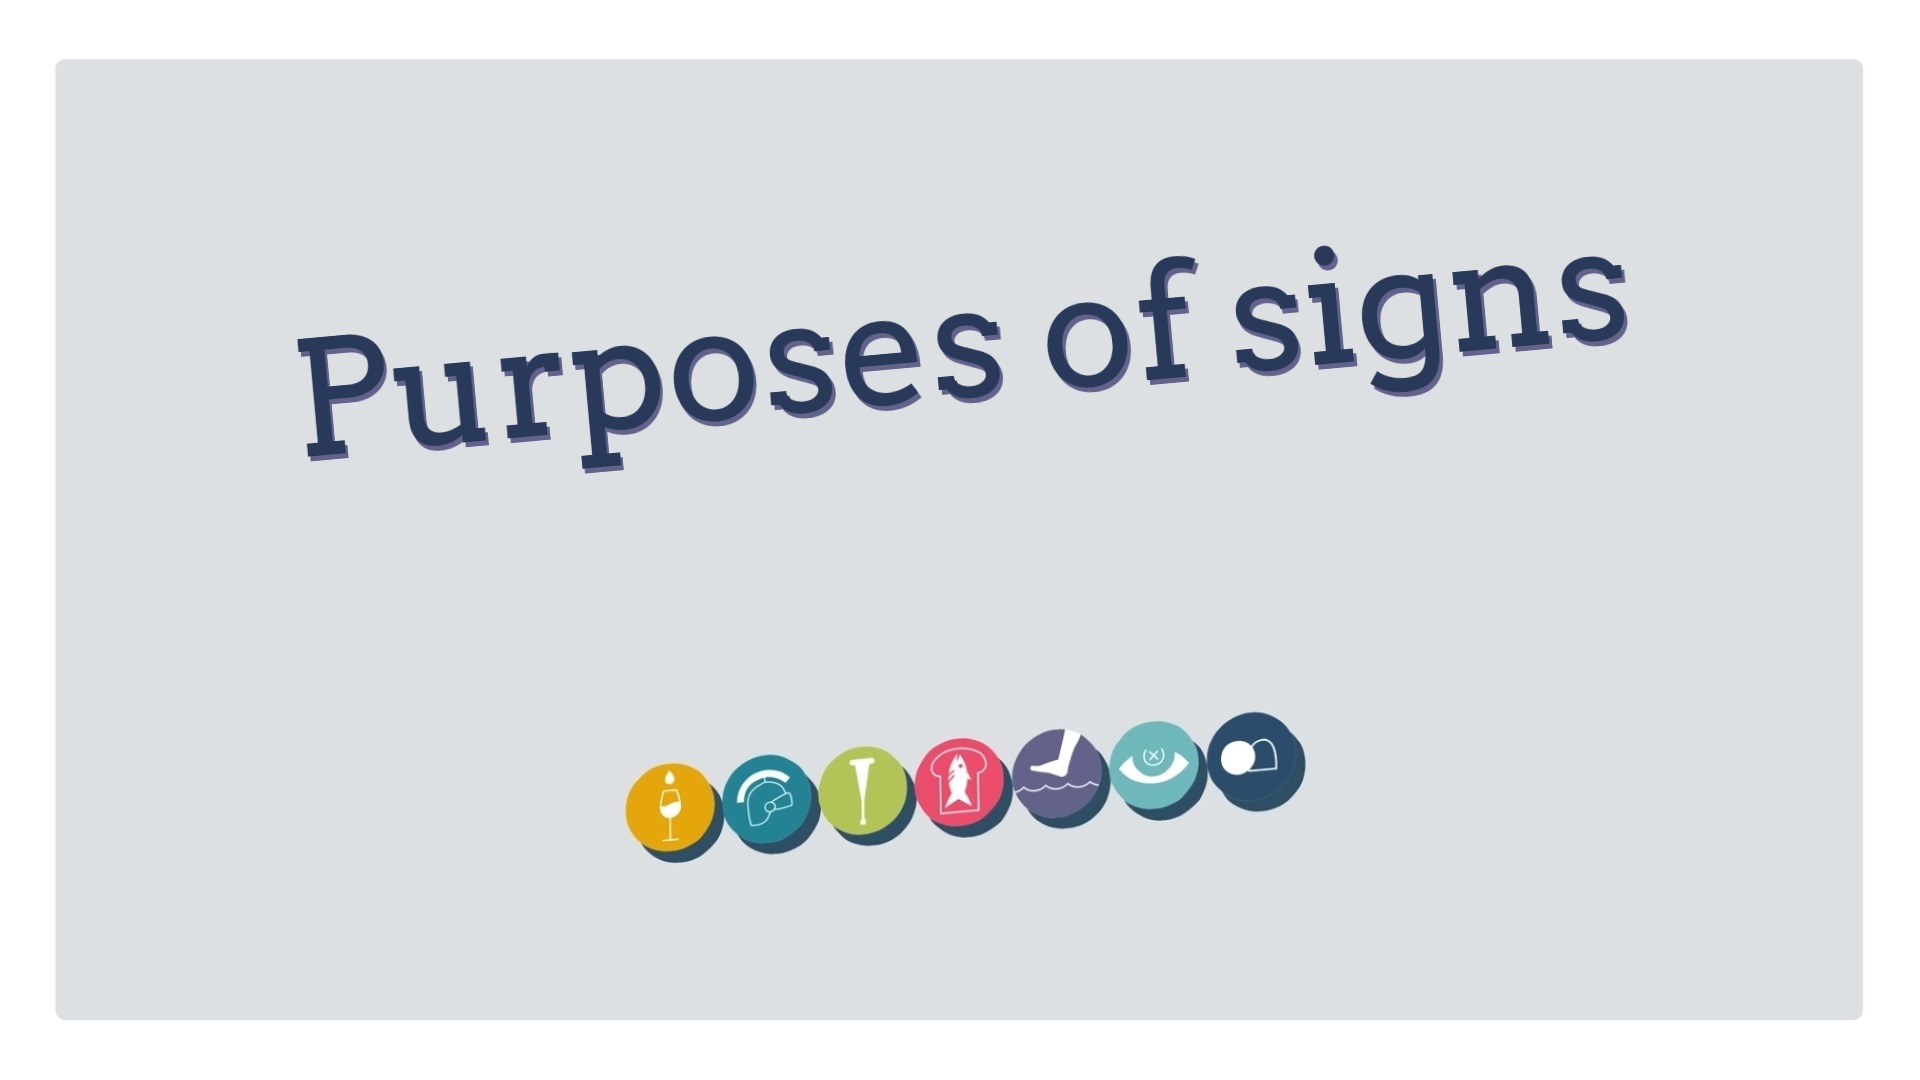 Purposes of signs